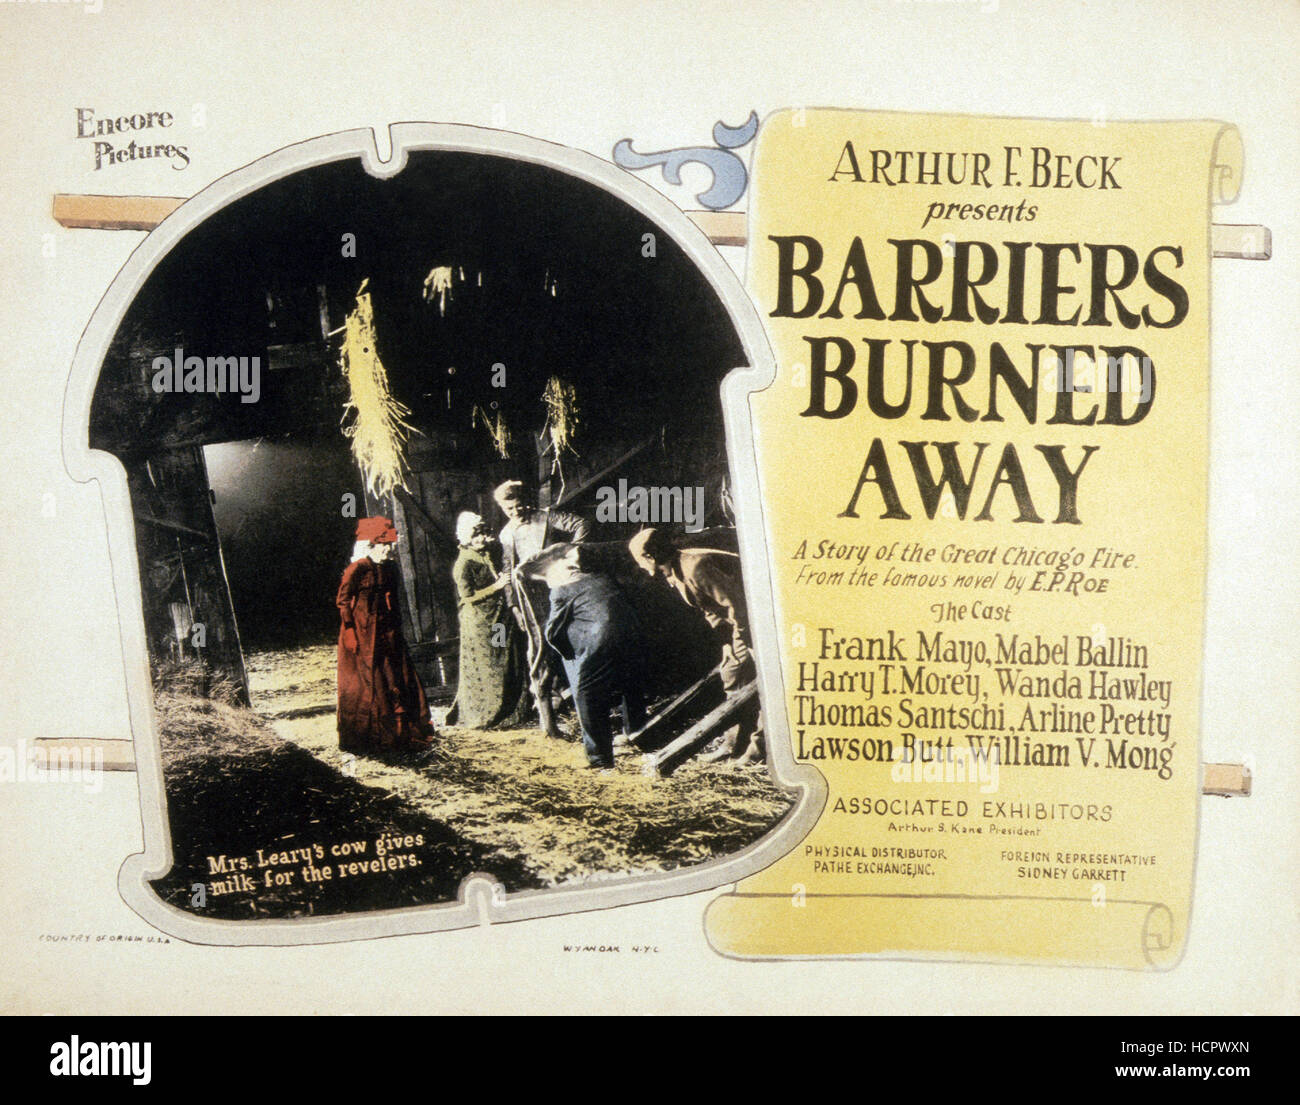 BARRIERS BURNED AWAY, 1925 Stock Photo